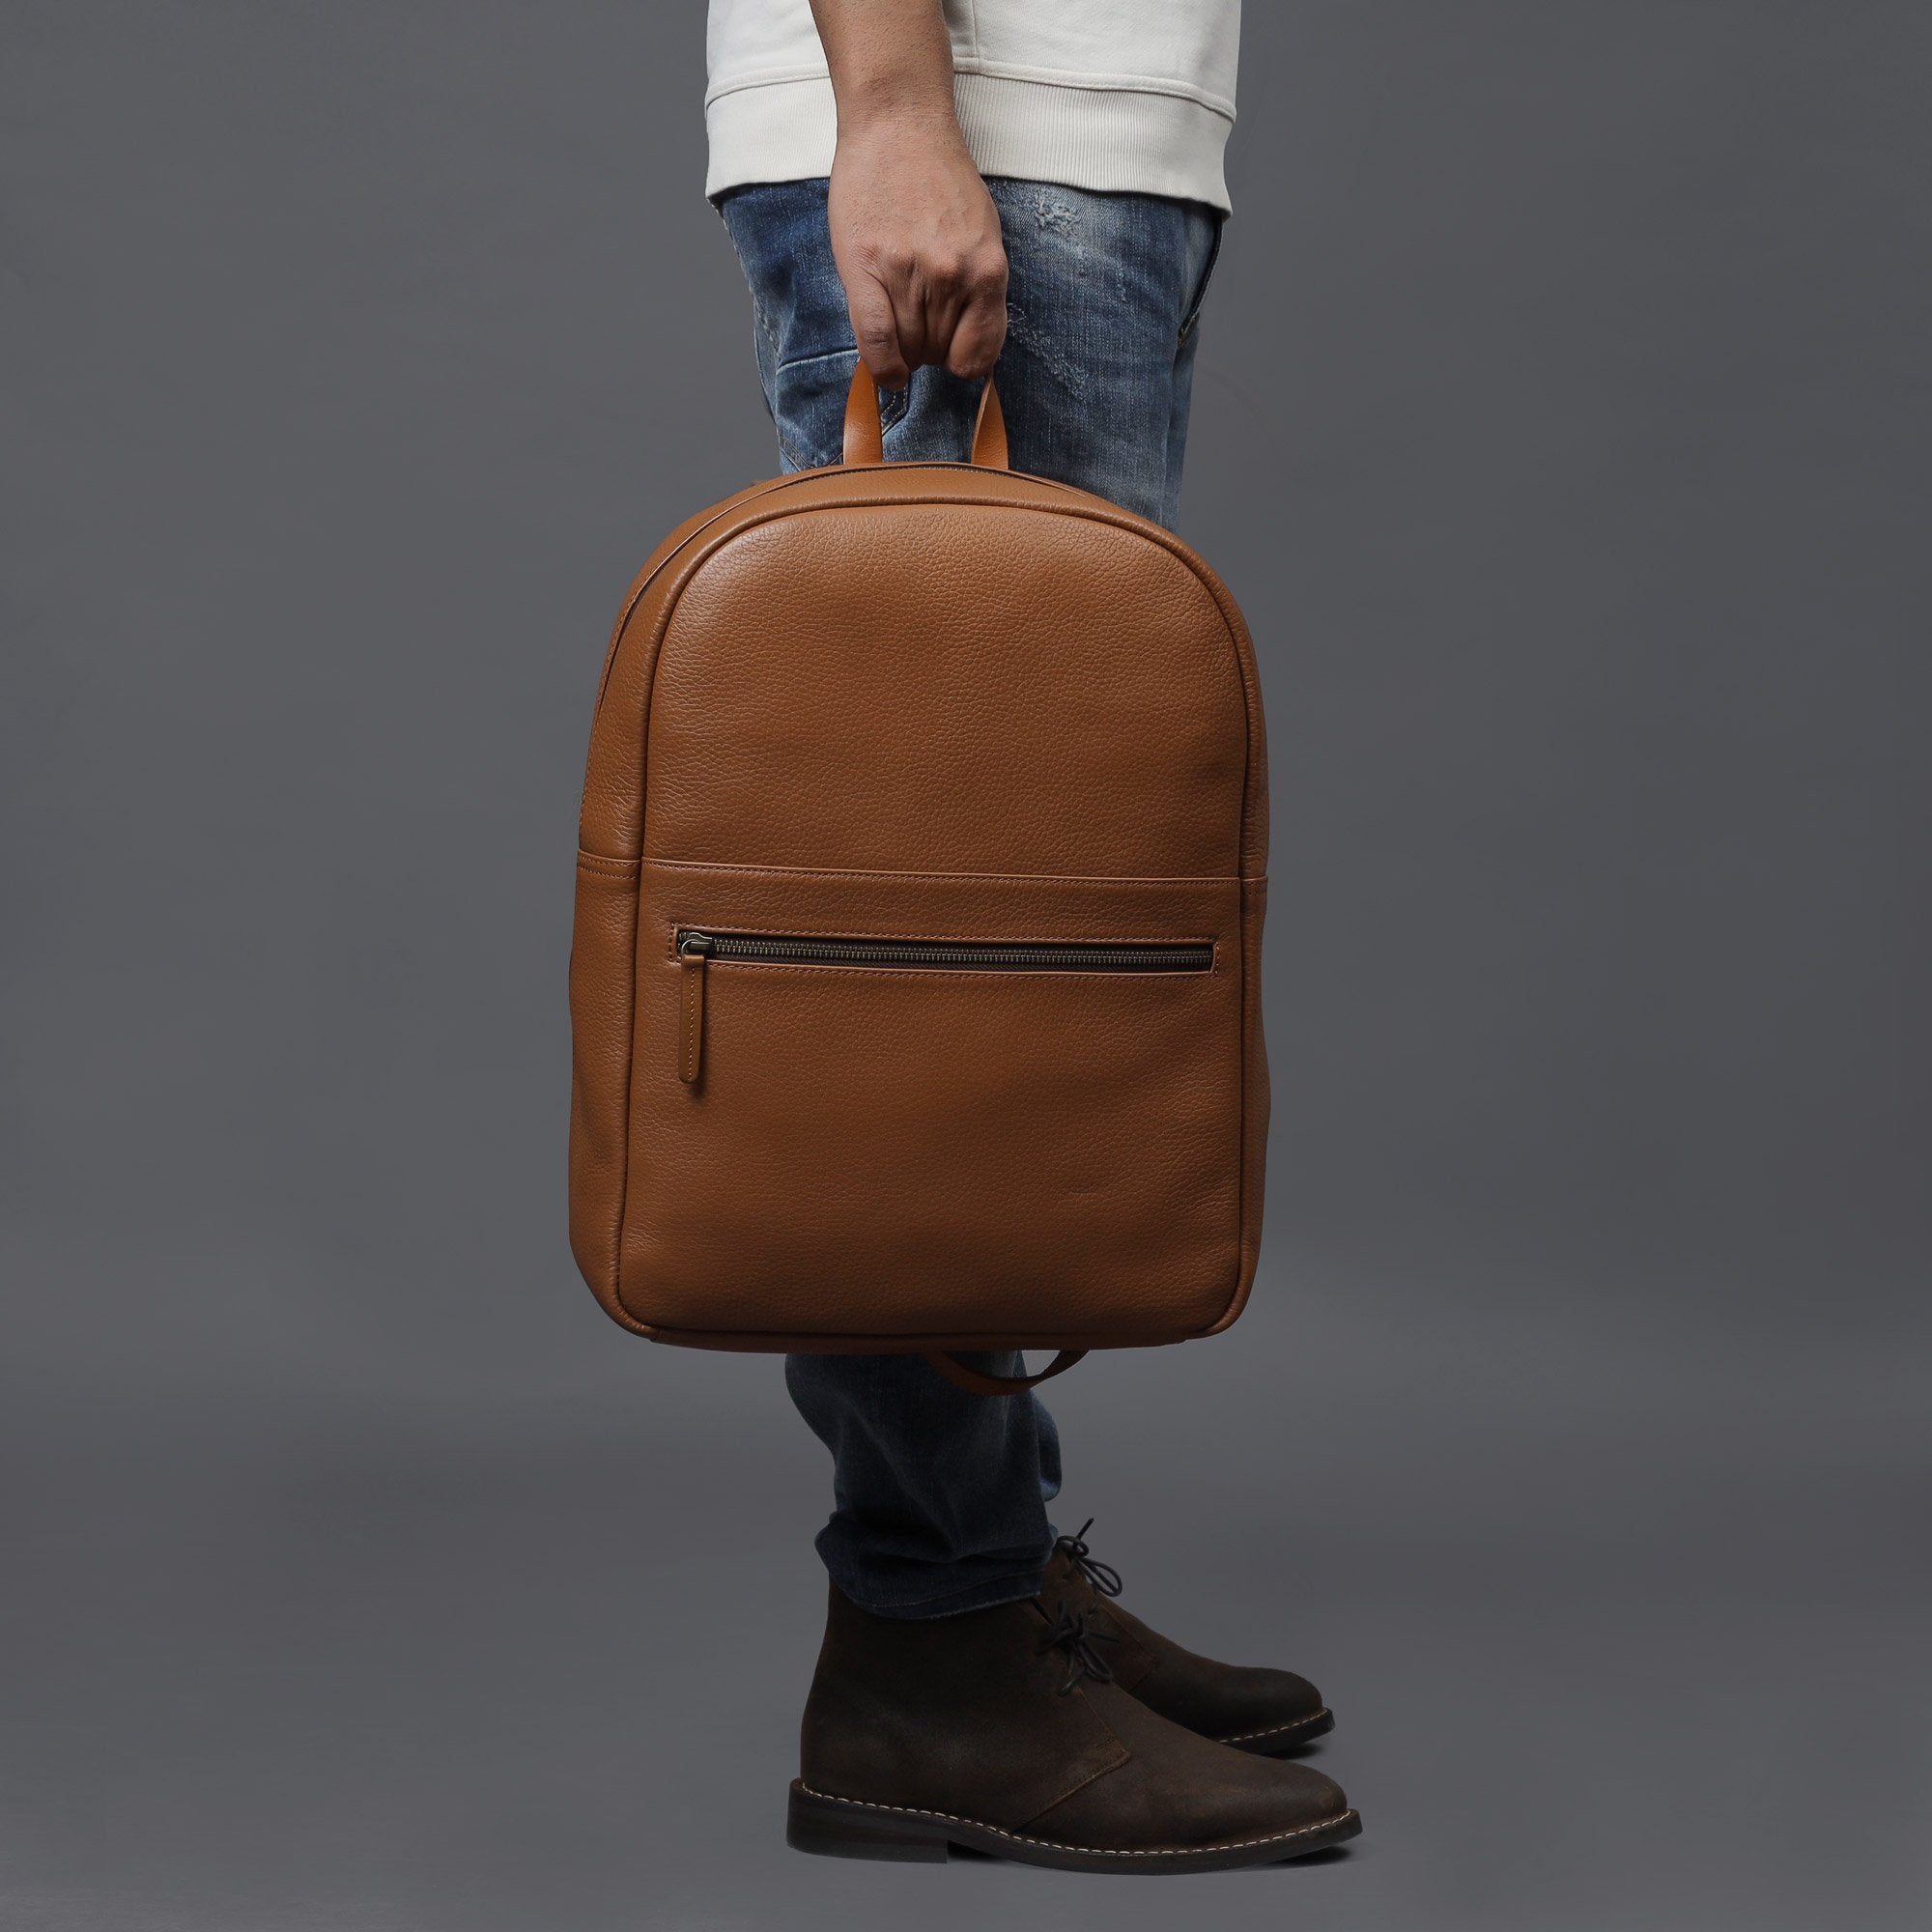 Tan leather backpack for men